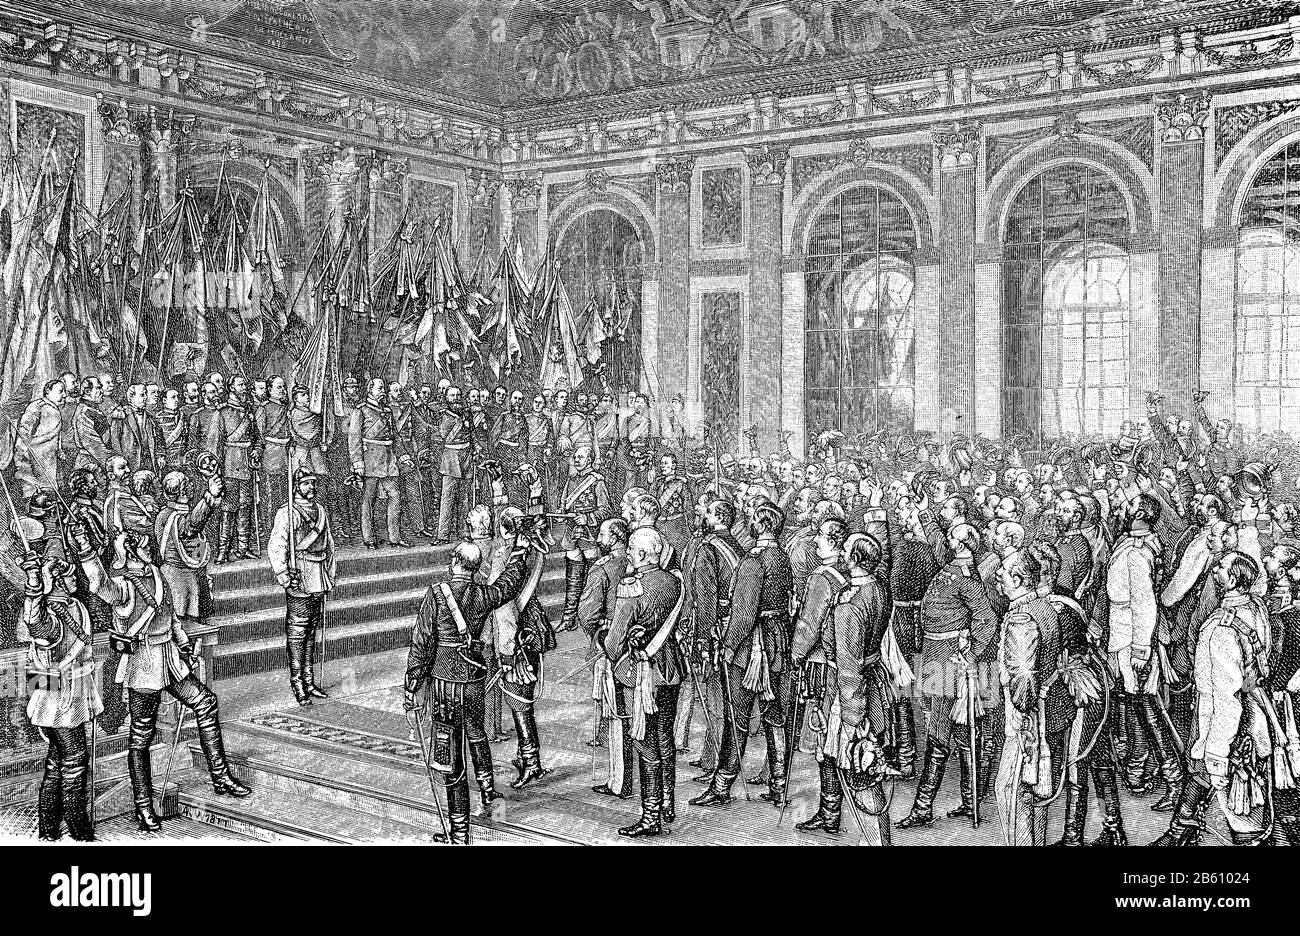 The Imperial Proclamation in Versailles, The Proclamation of the German Empire , 18 January 1871, historical painting by the German painter Anton von Werner  /  Die kaiserliche Proklamation in Versailles, Die Proklamation des Deutschen Reiches, 18. Januar 1871, historisches Gemälde des deutschen Malers Anton von Werner, Historisch, digital improved reproduction of an original from the 19th century / digitale Reproduktion einer Originalvorlage aus dem 19. Jahrhundert Stock Photo